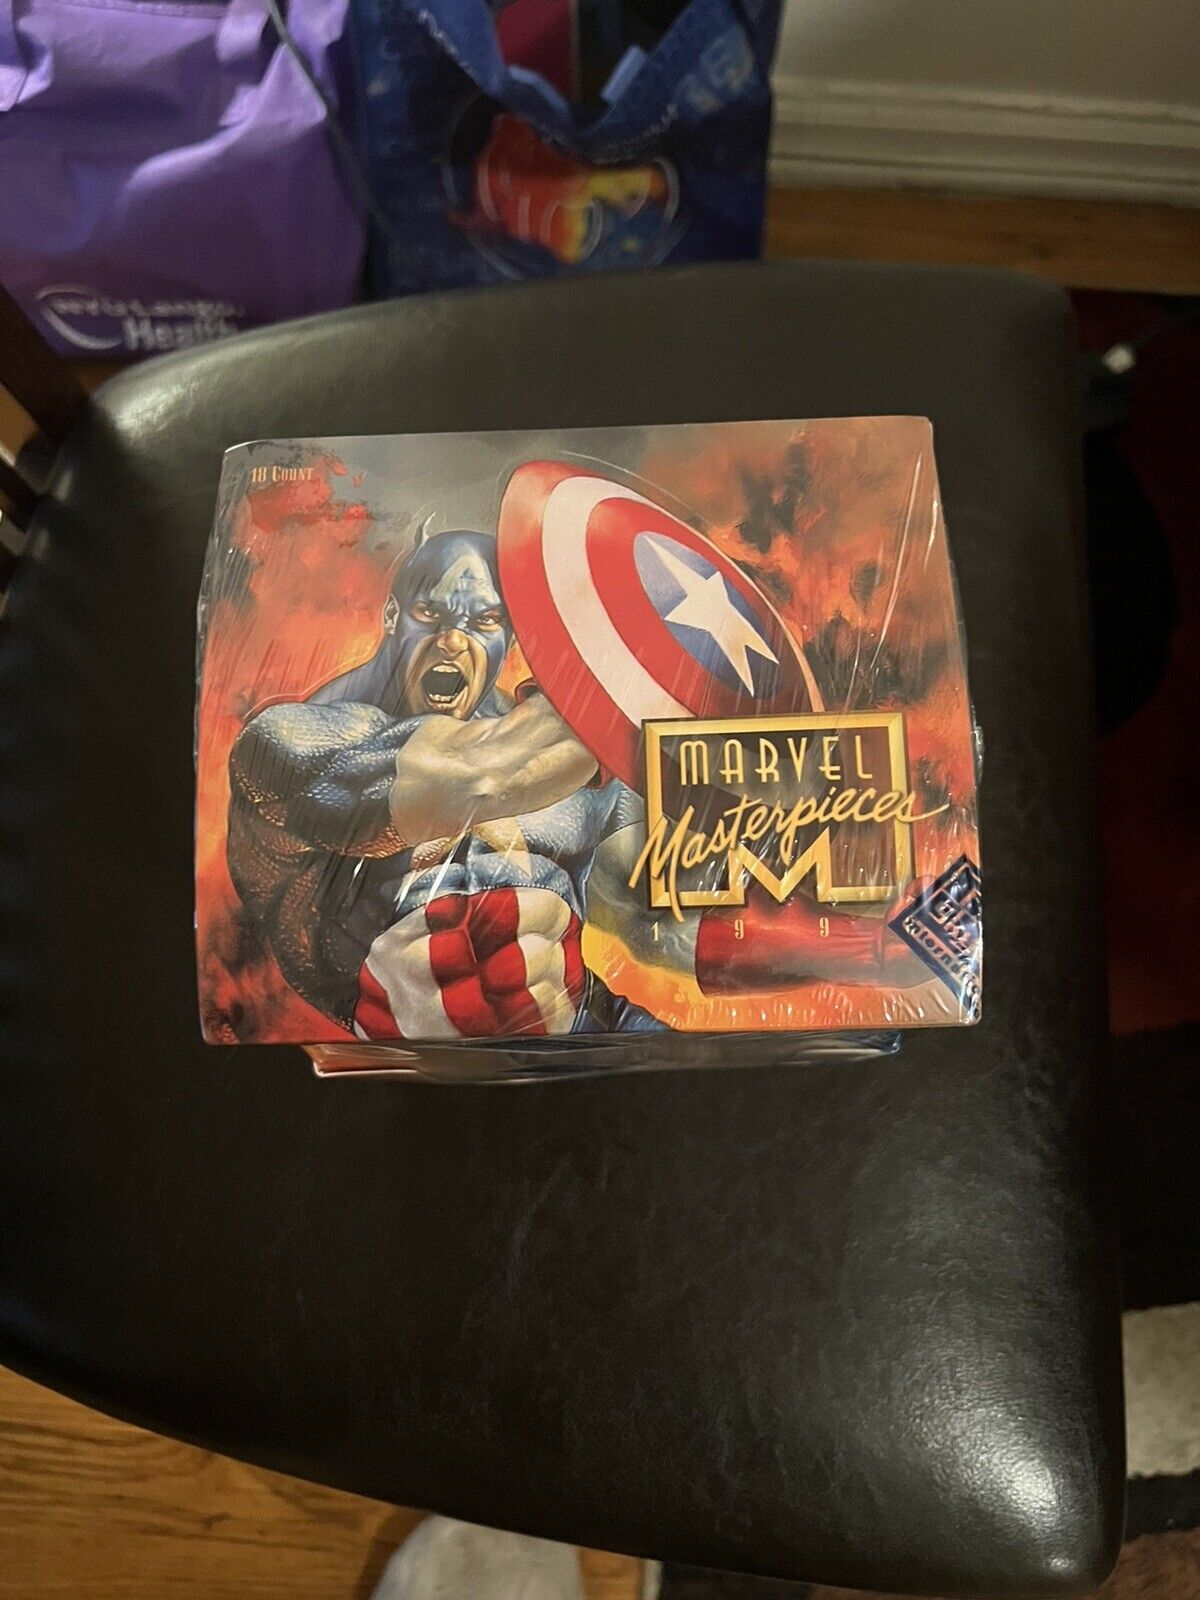 FLEER SKYBOX 1996 MARVEL MASTERPIECES BLISTER PACK BOX - FACTORY SEALED